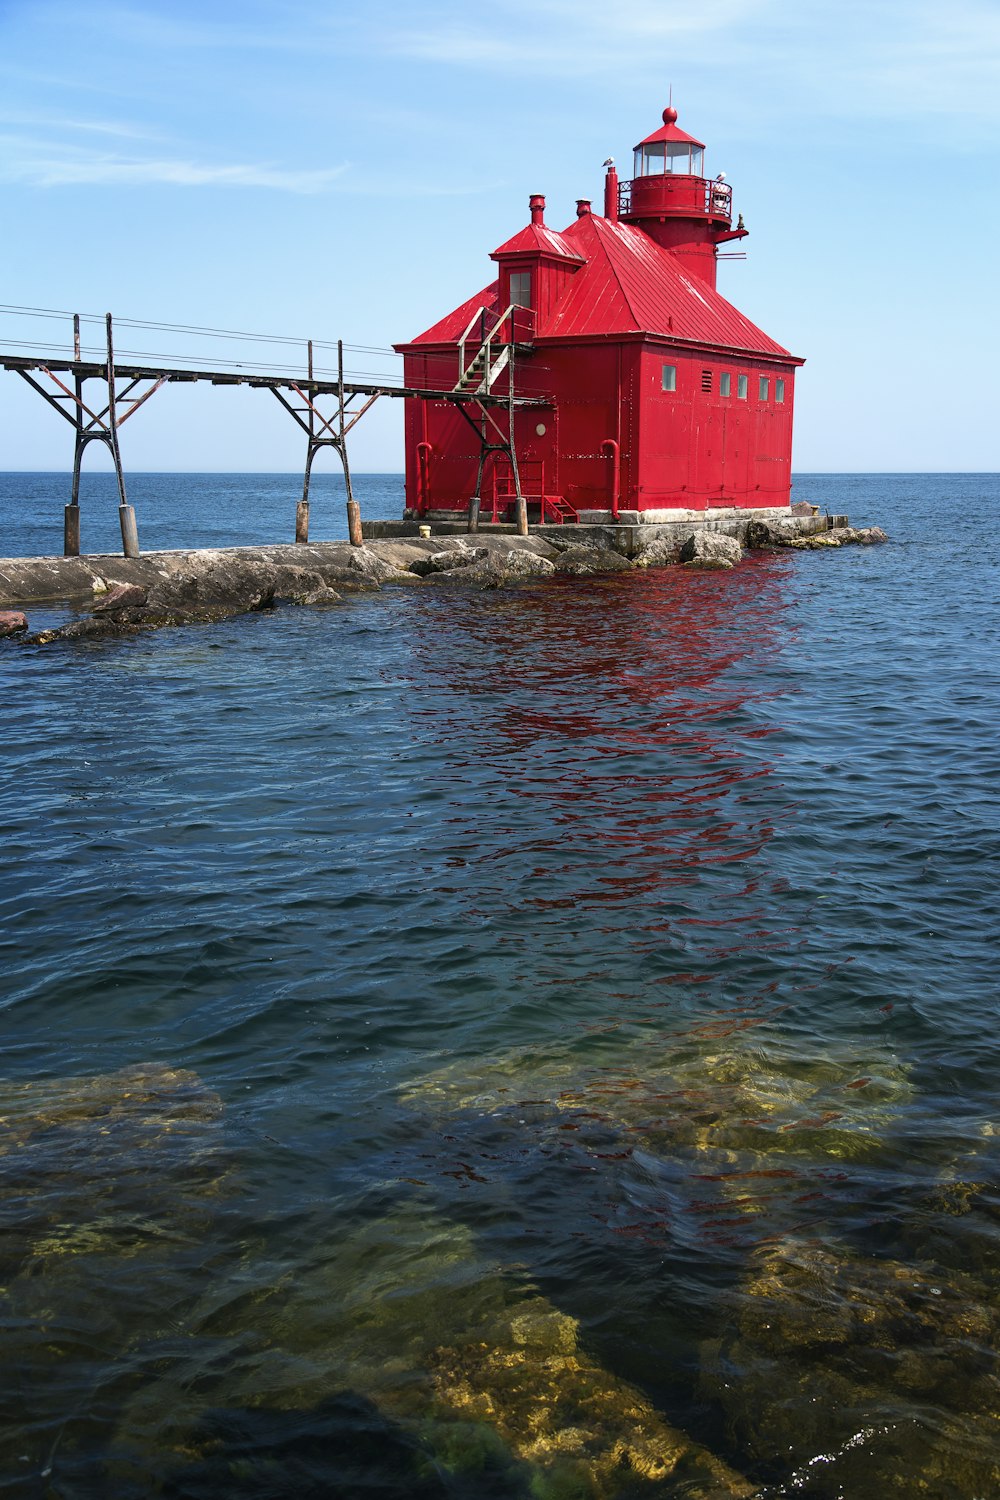 red and white wooden house beside body of water during daytime